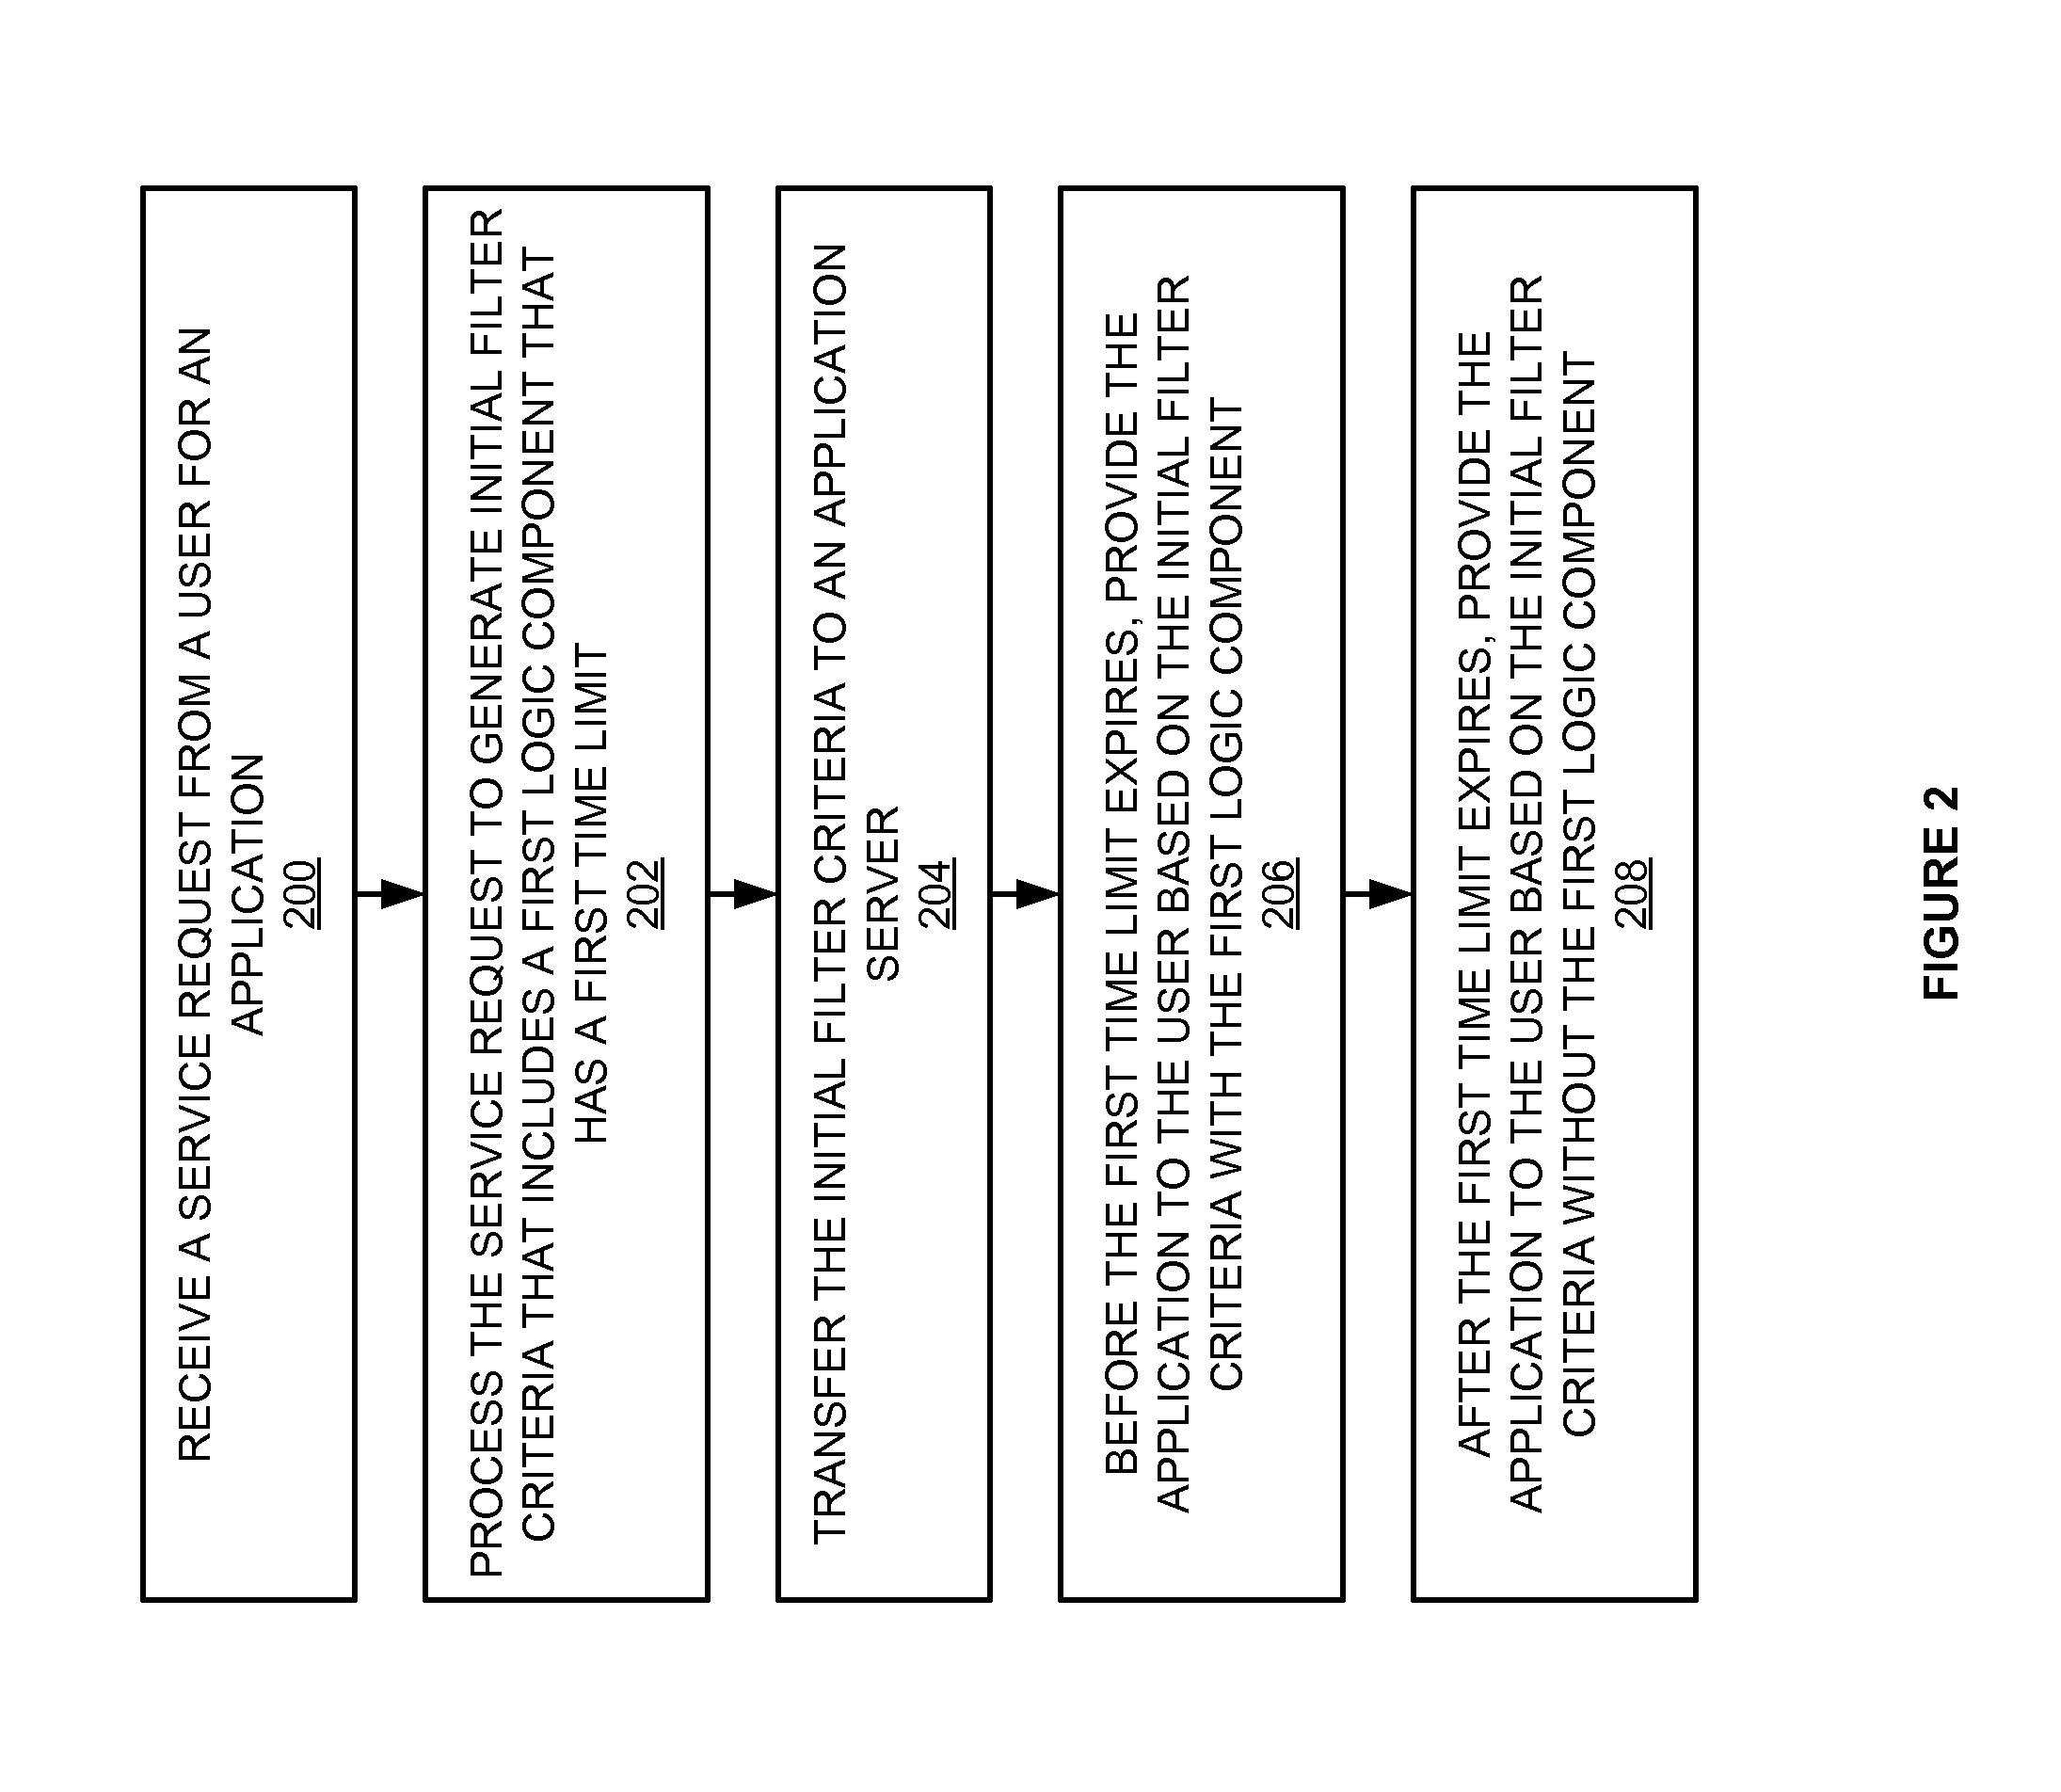 Timer based logic component for initial filter criteria in a wireless communication system